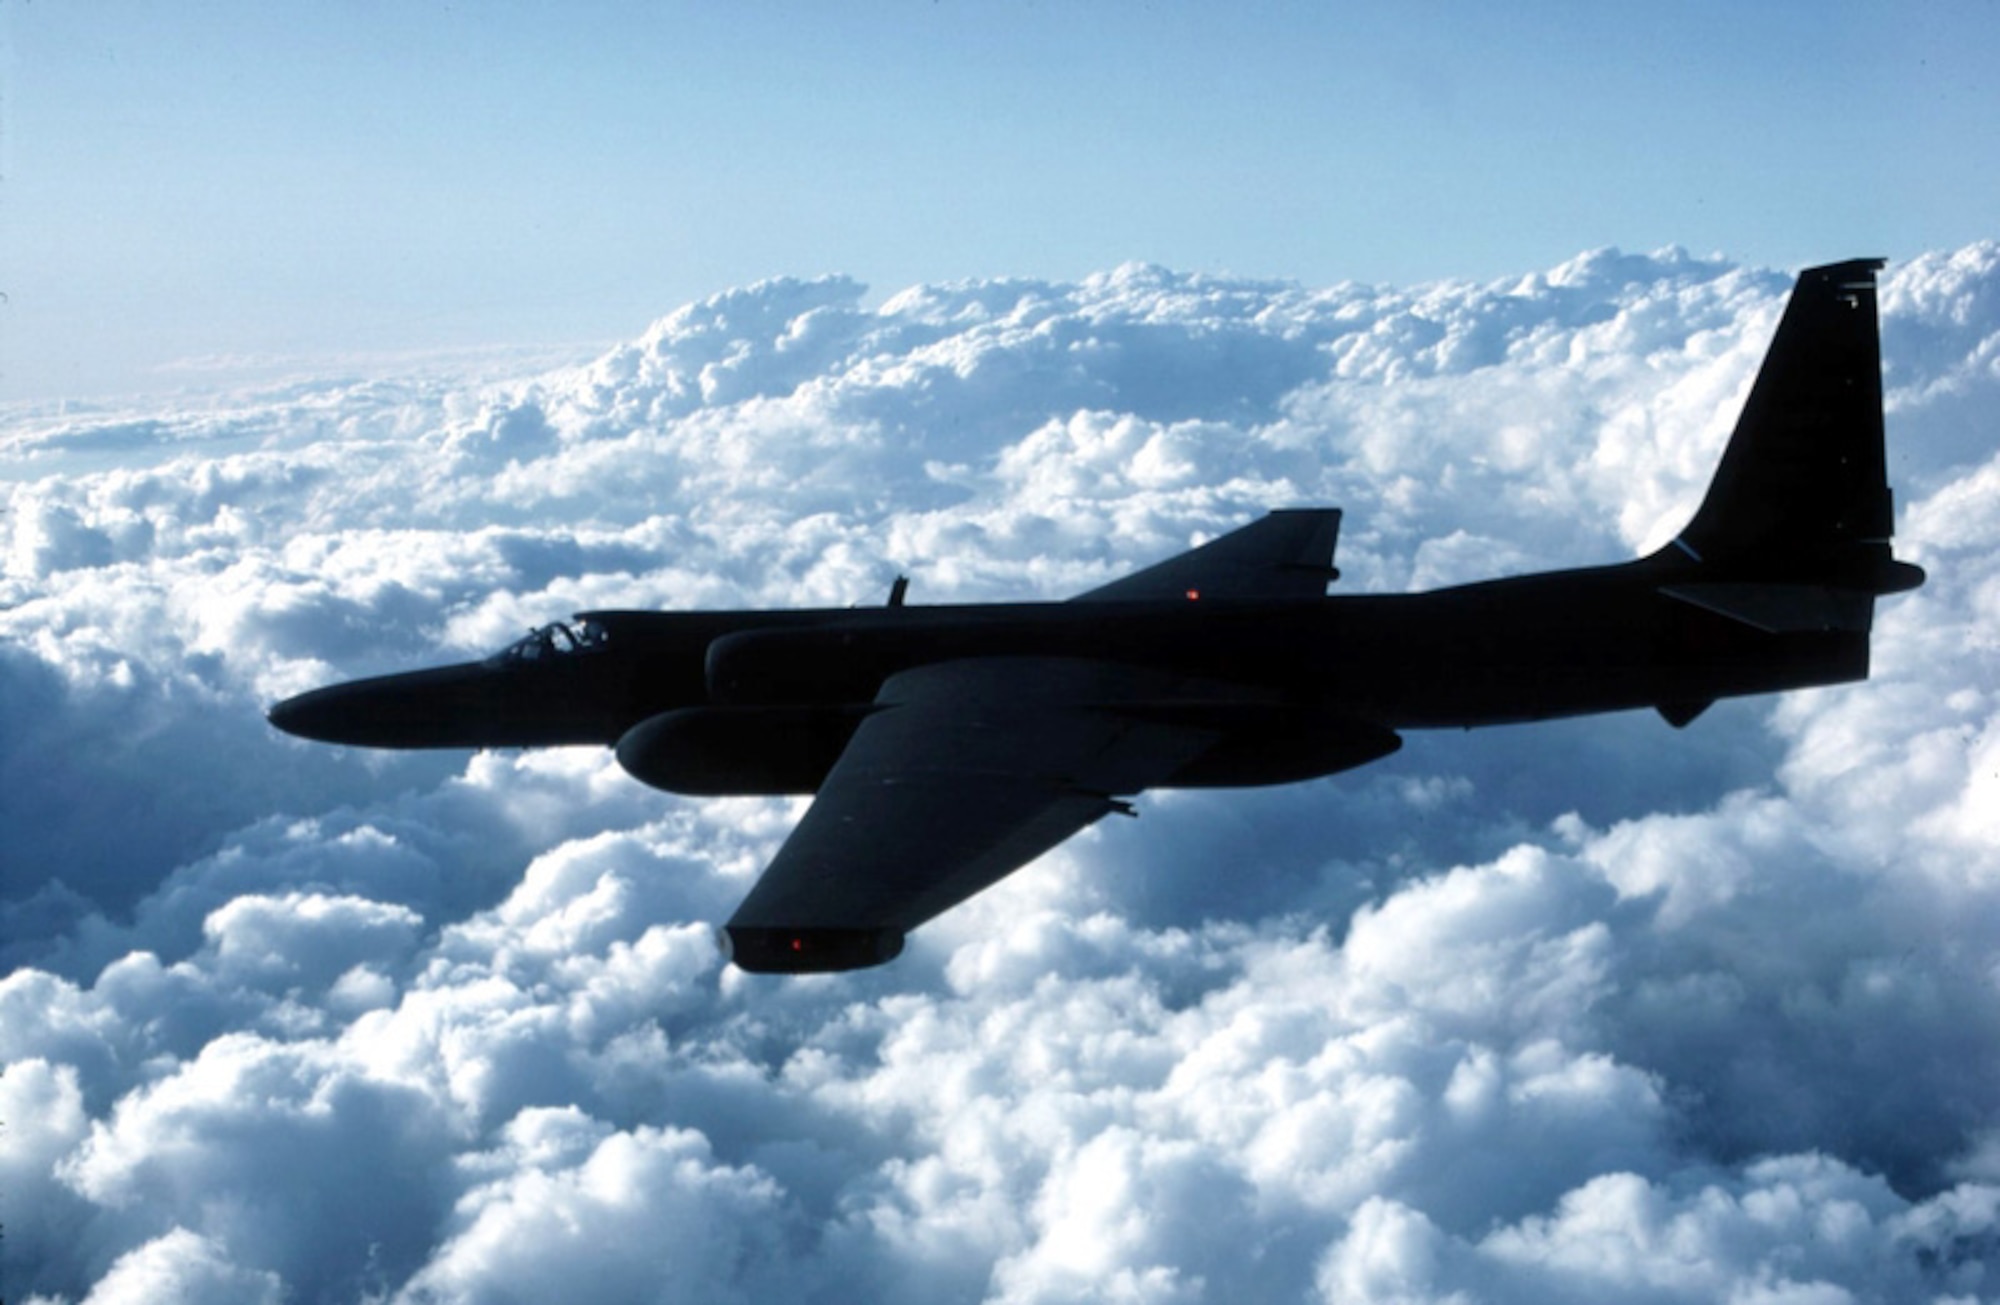 FILE PHOTO -- The U-2 provides continuous day or night, high-altitude, all-weather, stand-off surveillance of an area in direct support of U.S. and allied ground and air forces. It provides critical intelligence to decision makers through all phases of conflict, including peacetime indications and warnings, crises, low-intensity conflict and large-scale hostilities.The U-2 is a single-seat, single-engine, high-altitude, reconnaissance aircraft. Long, wide, straight wings give the U-2 glider-like characteristics. It can carry a variety of sensors and cameras, is an extremely reliable reconnaissance aircraft, and enjoys a high mission completion rate. Because of its high altitude mission, the pilot must wear a full pressure suit. The U-2 is capable of collecting multi-sensor photo, electro-optic, infrared and radar imagery, as well as performing other types of reconnaissance functions. (Air Force photo)

